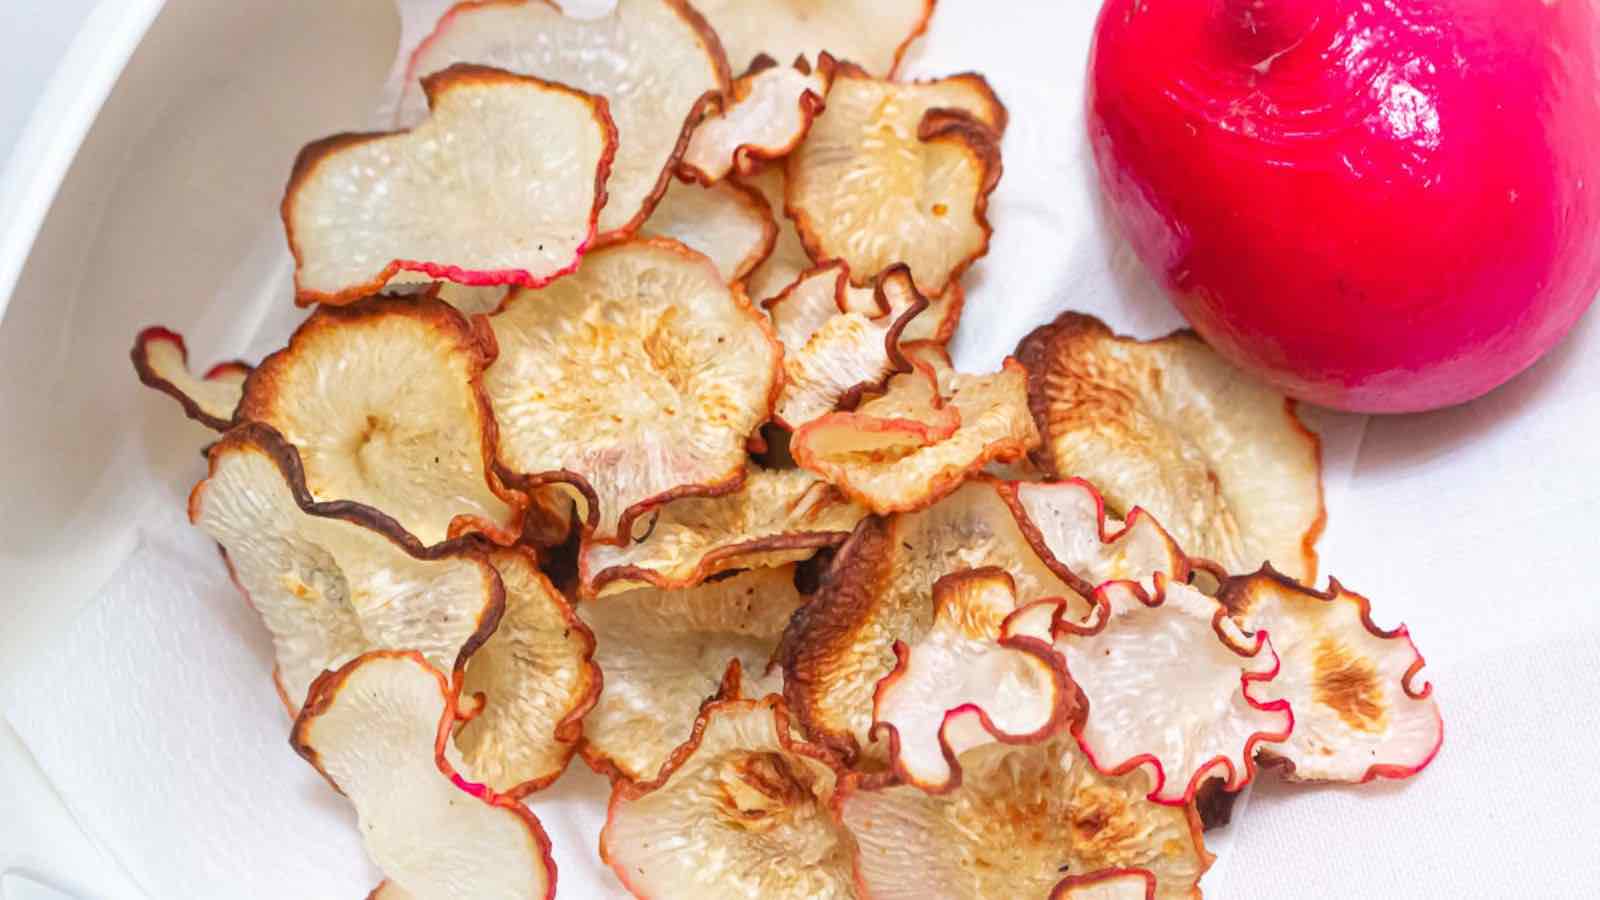 Sliced radishes on a white plate next to a red radish.